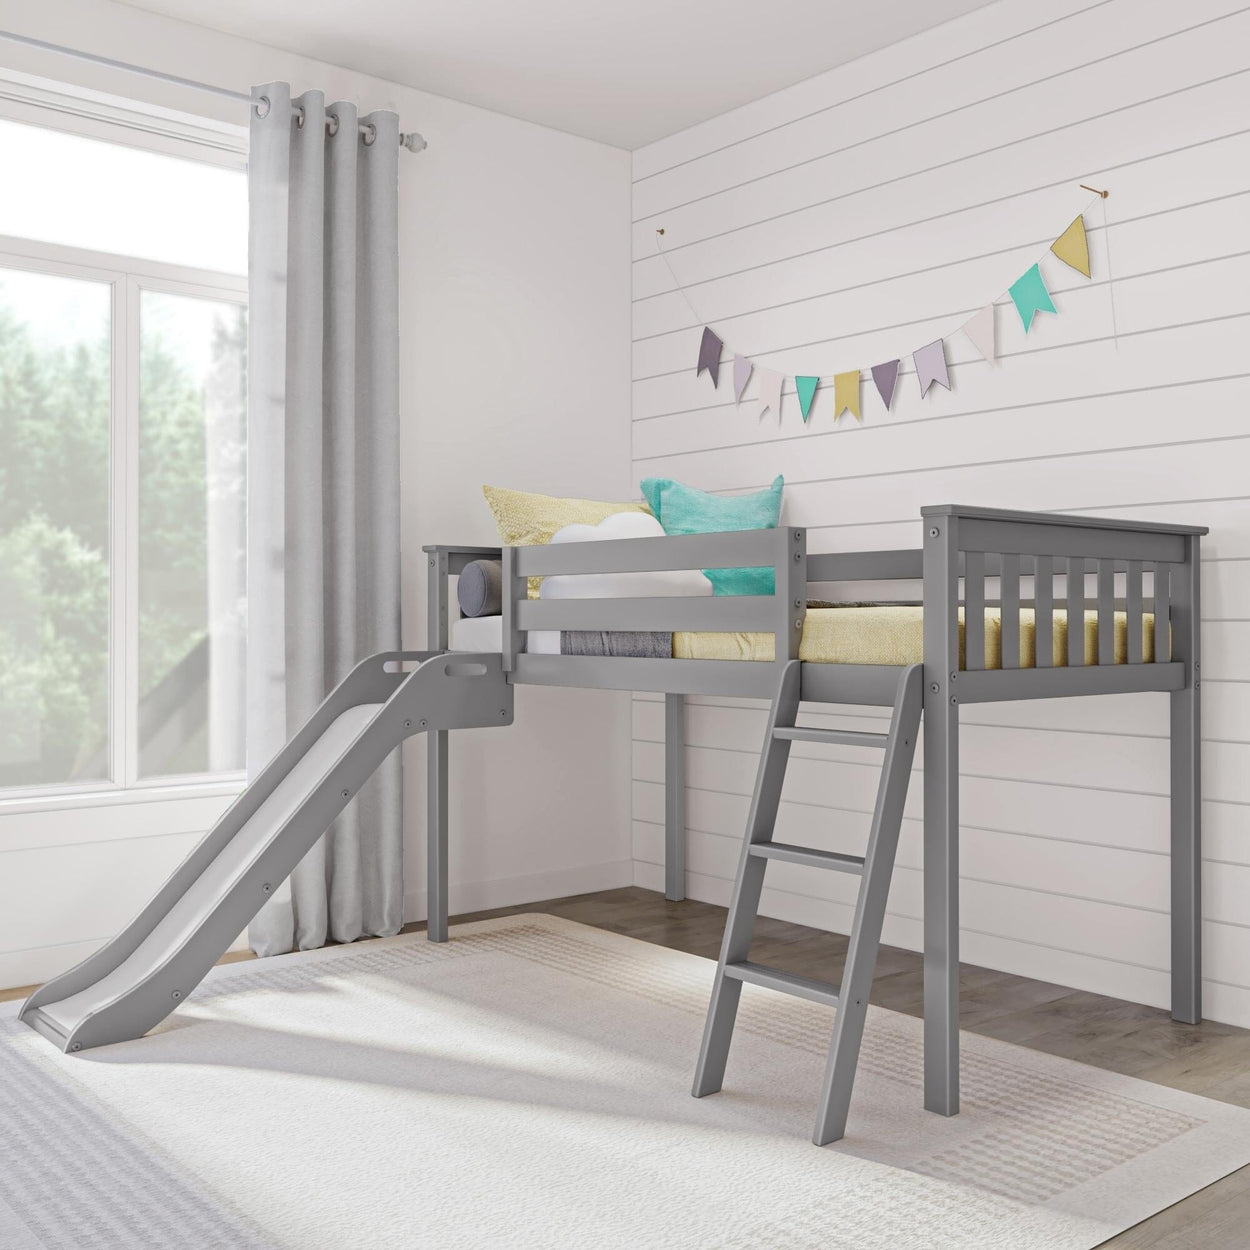 180413-121 : Loft Beds Max & Lily Twin Size Low Loft Bed with Slide and Ladder, Classic Solid Wood Kids Bedroom Furniture, 400 lbs Weight Capacity, 14" Safety Guardrail, Anti-Slip Steps, Grey